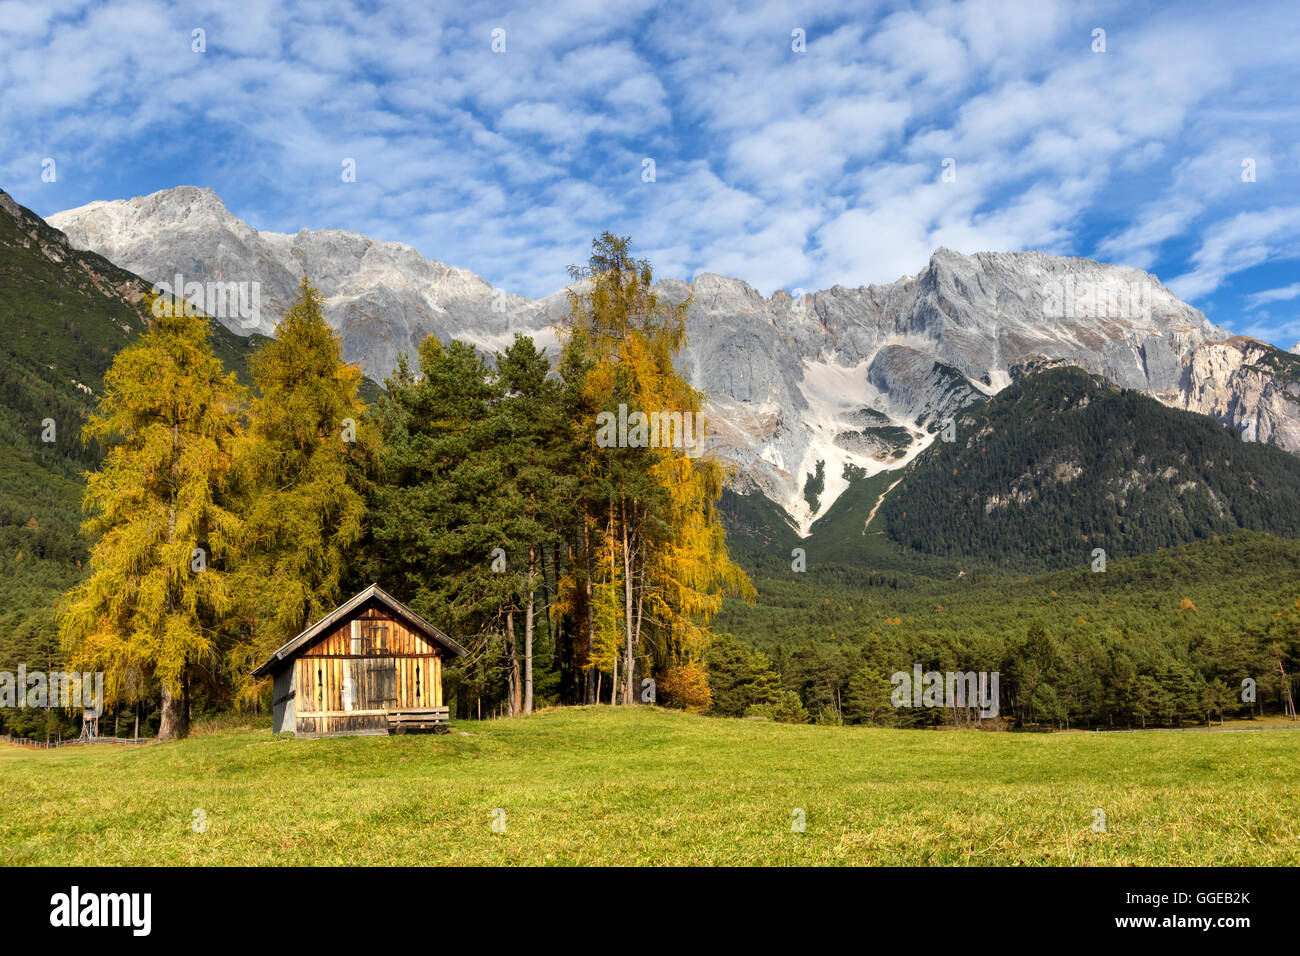 Autumn scenery of Miemenger Plateau with rocky mountains peaks in the background. Austria, Europe, Tyrol. Stock Photo